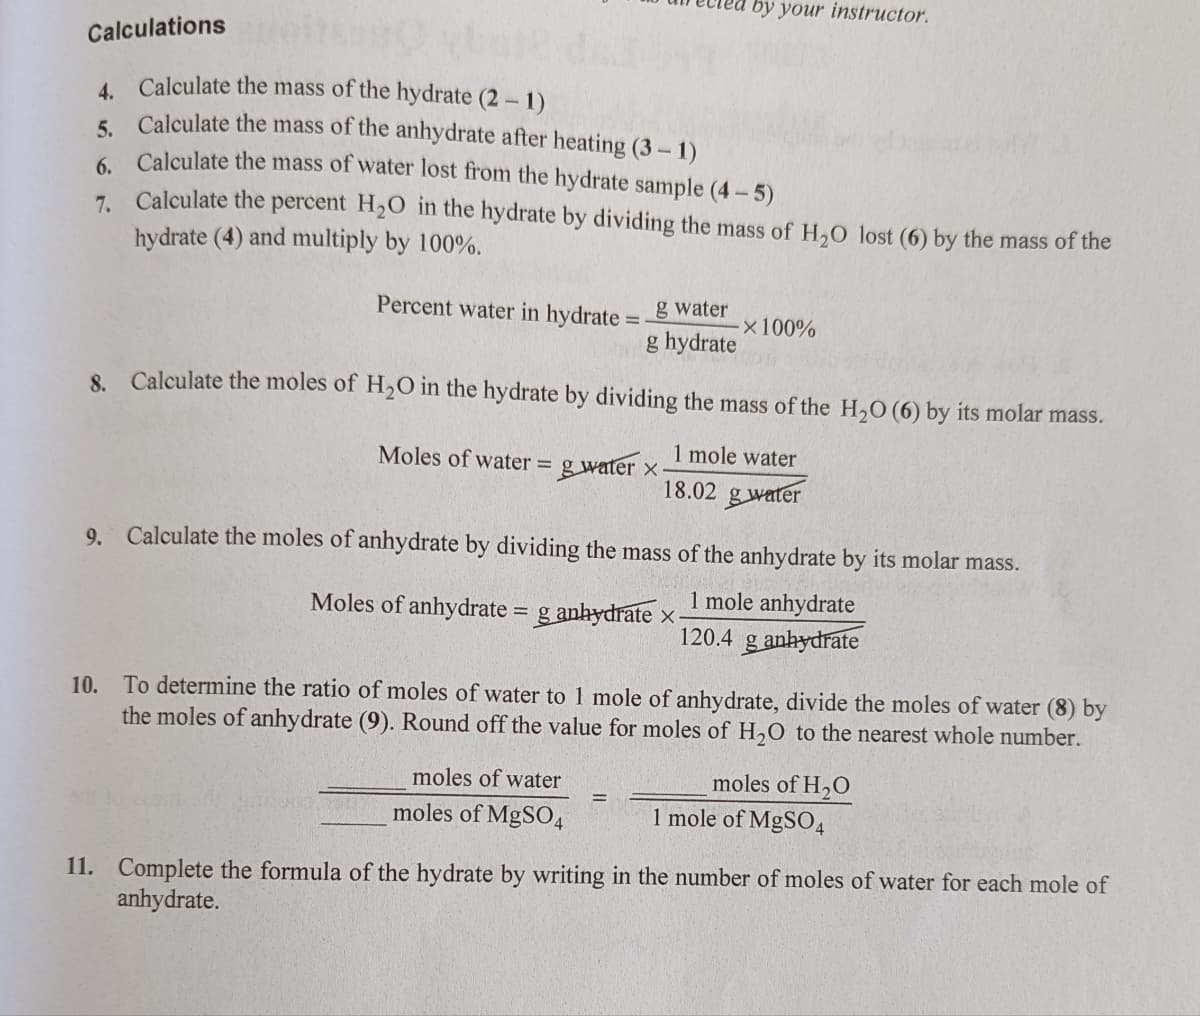 by your instructor.
Calculations
4 Calculate the mass of the hydrate (2 - 1)
5. Calculate the mass of the anhydrate after heating (3- 1)
6. Calculate the mass of water lost from the hydrate sample (4-5)
7. Calculate the percent H2O in the hydrate by dividing the mass of H,O lost (6) by the mass of the
hydrate (4) and multiply by 100%.
Percent water in hydrate
g water
x100%
%3D
g hydrate
8. Calculate the moles of H2O in the hydrate by dividing the mass of the H,O (6) by its molar mass.
Moles of water = g water x
1 mole water
%3D
18.02 g water
9. Calculate the moles of anhydrate by dividing the mass of the anhydrate by its molar mass.
1 mole anhydrate
120.4 g anhydrate
Moles of anhydrate = g anhydrate x-
%3D
10. To determine the ratio of moles of water to 1 mole of anhydrate, divide the moles of water (8) by
the moles of anhydrate (9). Round off the value for moles of H,0 to the nearest whole number.
moles of water
moles of H,O
moles of MgS04
1 mole of MgSO4
11. Complete the formula of the hydrate by writing in the number of moles of water for each mole of
anhydrate.
